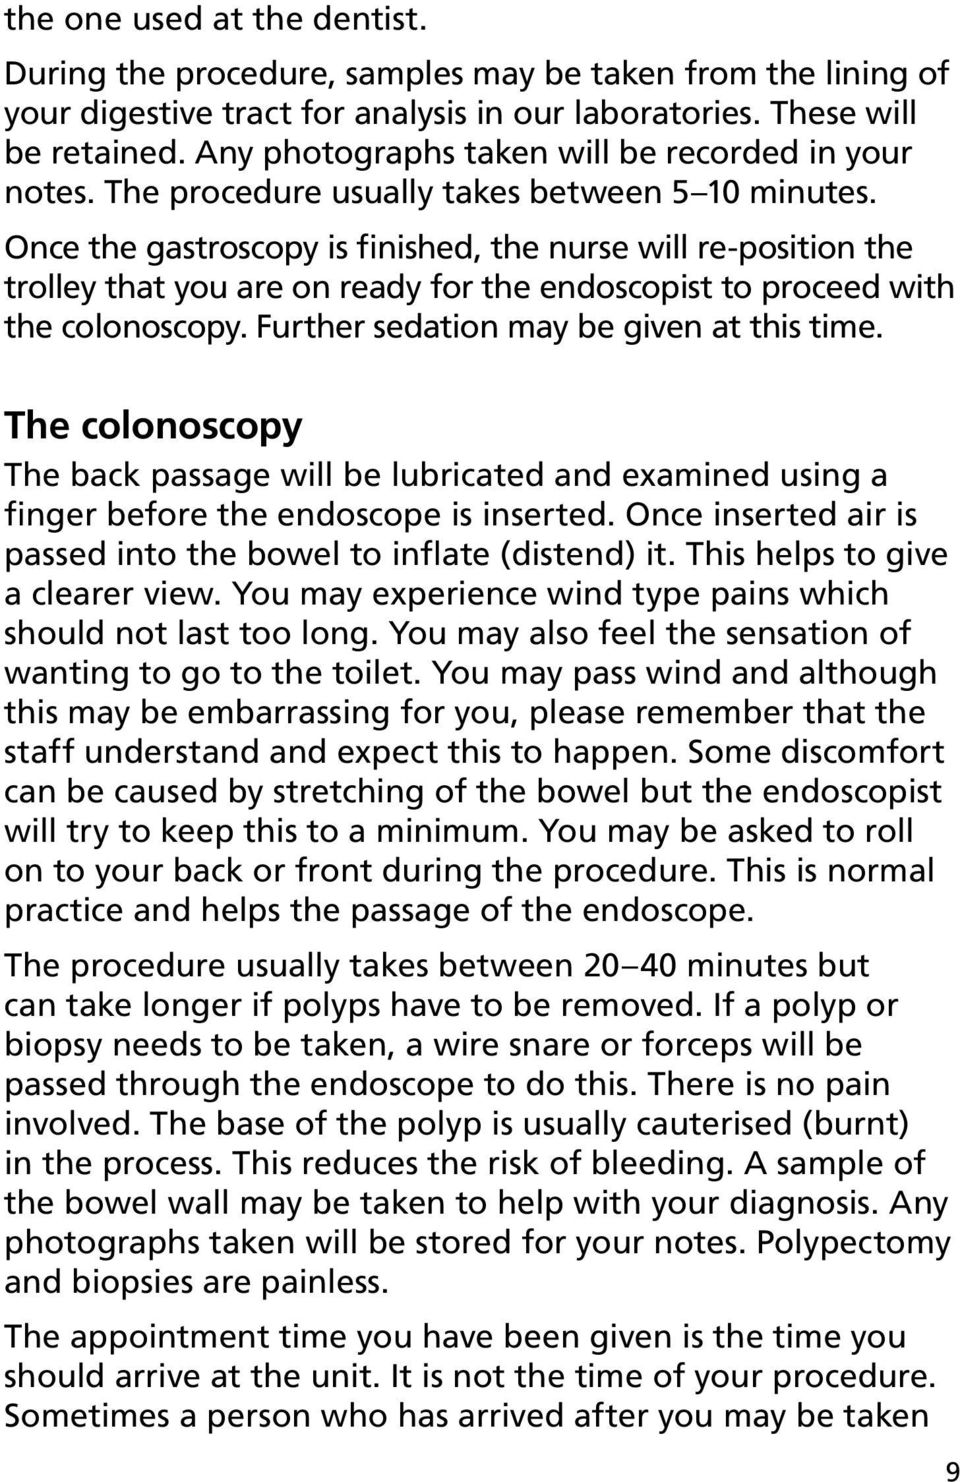 Once the gastroscopy is finished, the nurse will re-position the trolley that you are on ready for the endoscopist to proceed with the colonoscopy. Further sedation may be given at this time.